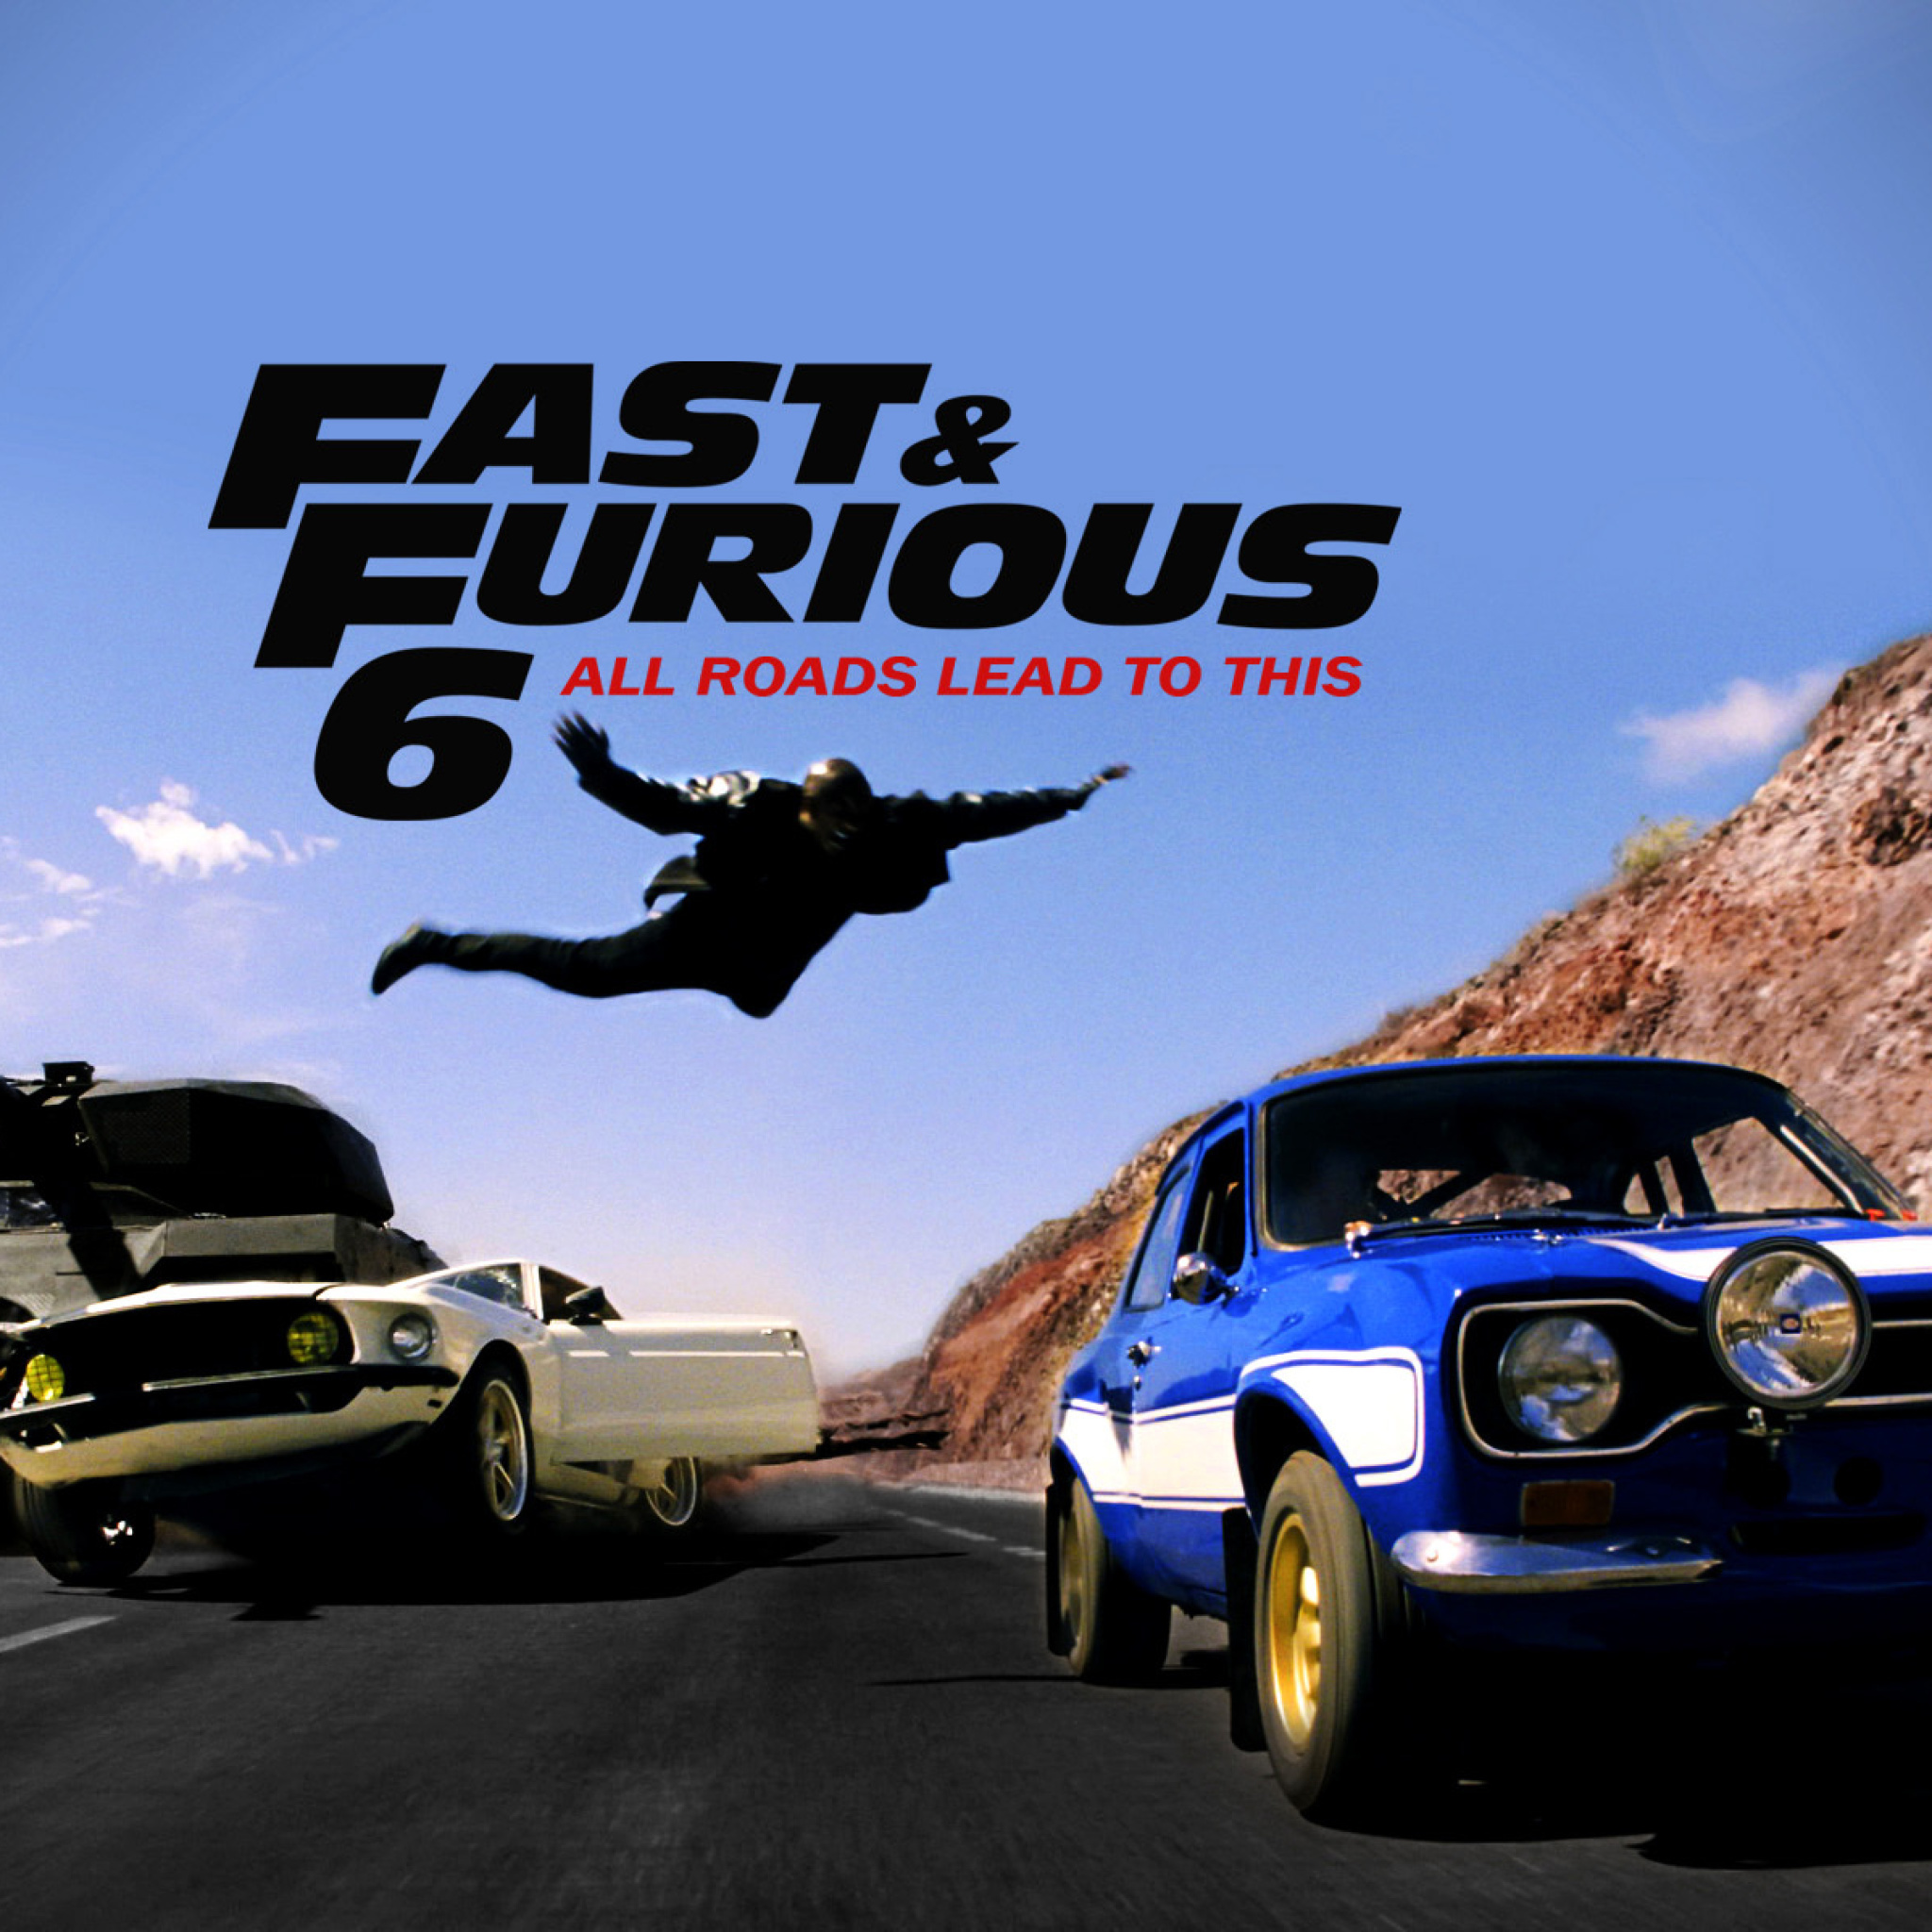 Fast and furious 6 Trailer wallpaper 2048x2048